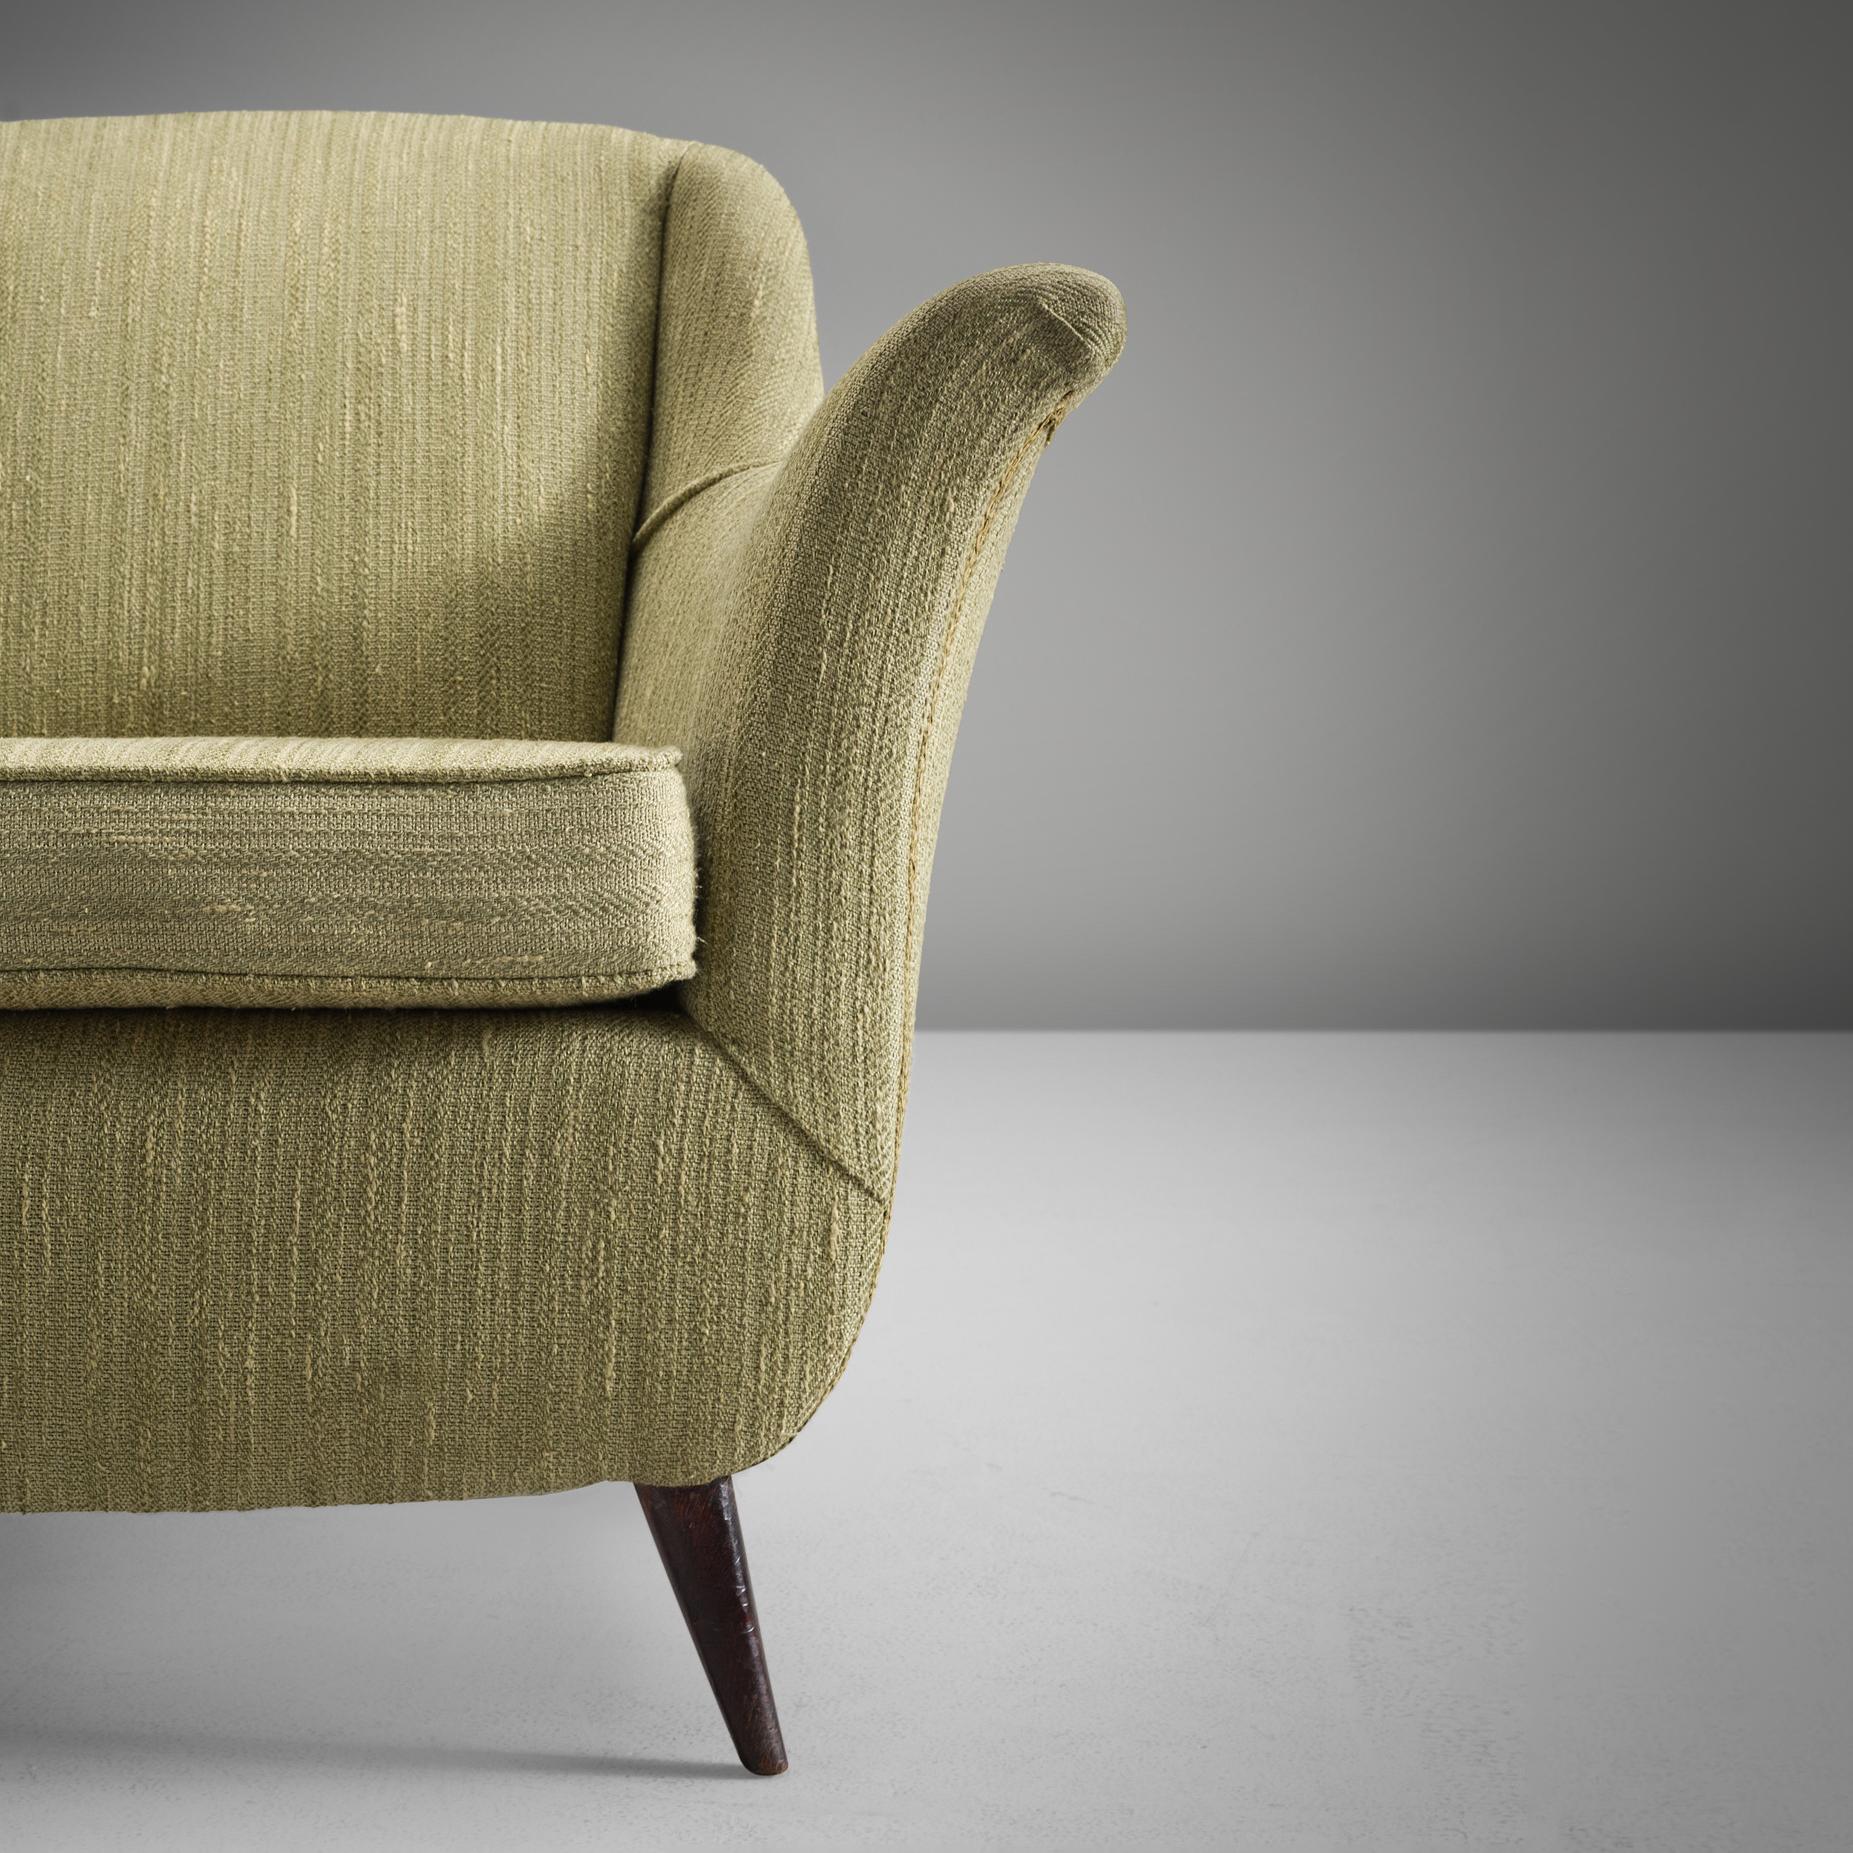 Mid-20th Century Pair of Italian Lounge Chairs in Soft Green Upholstery